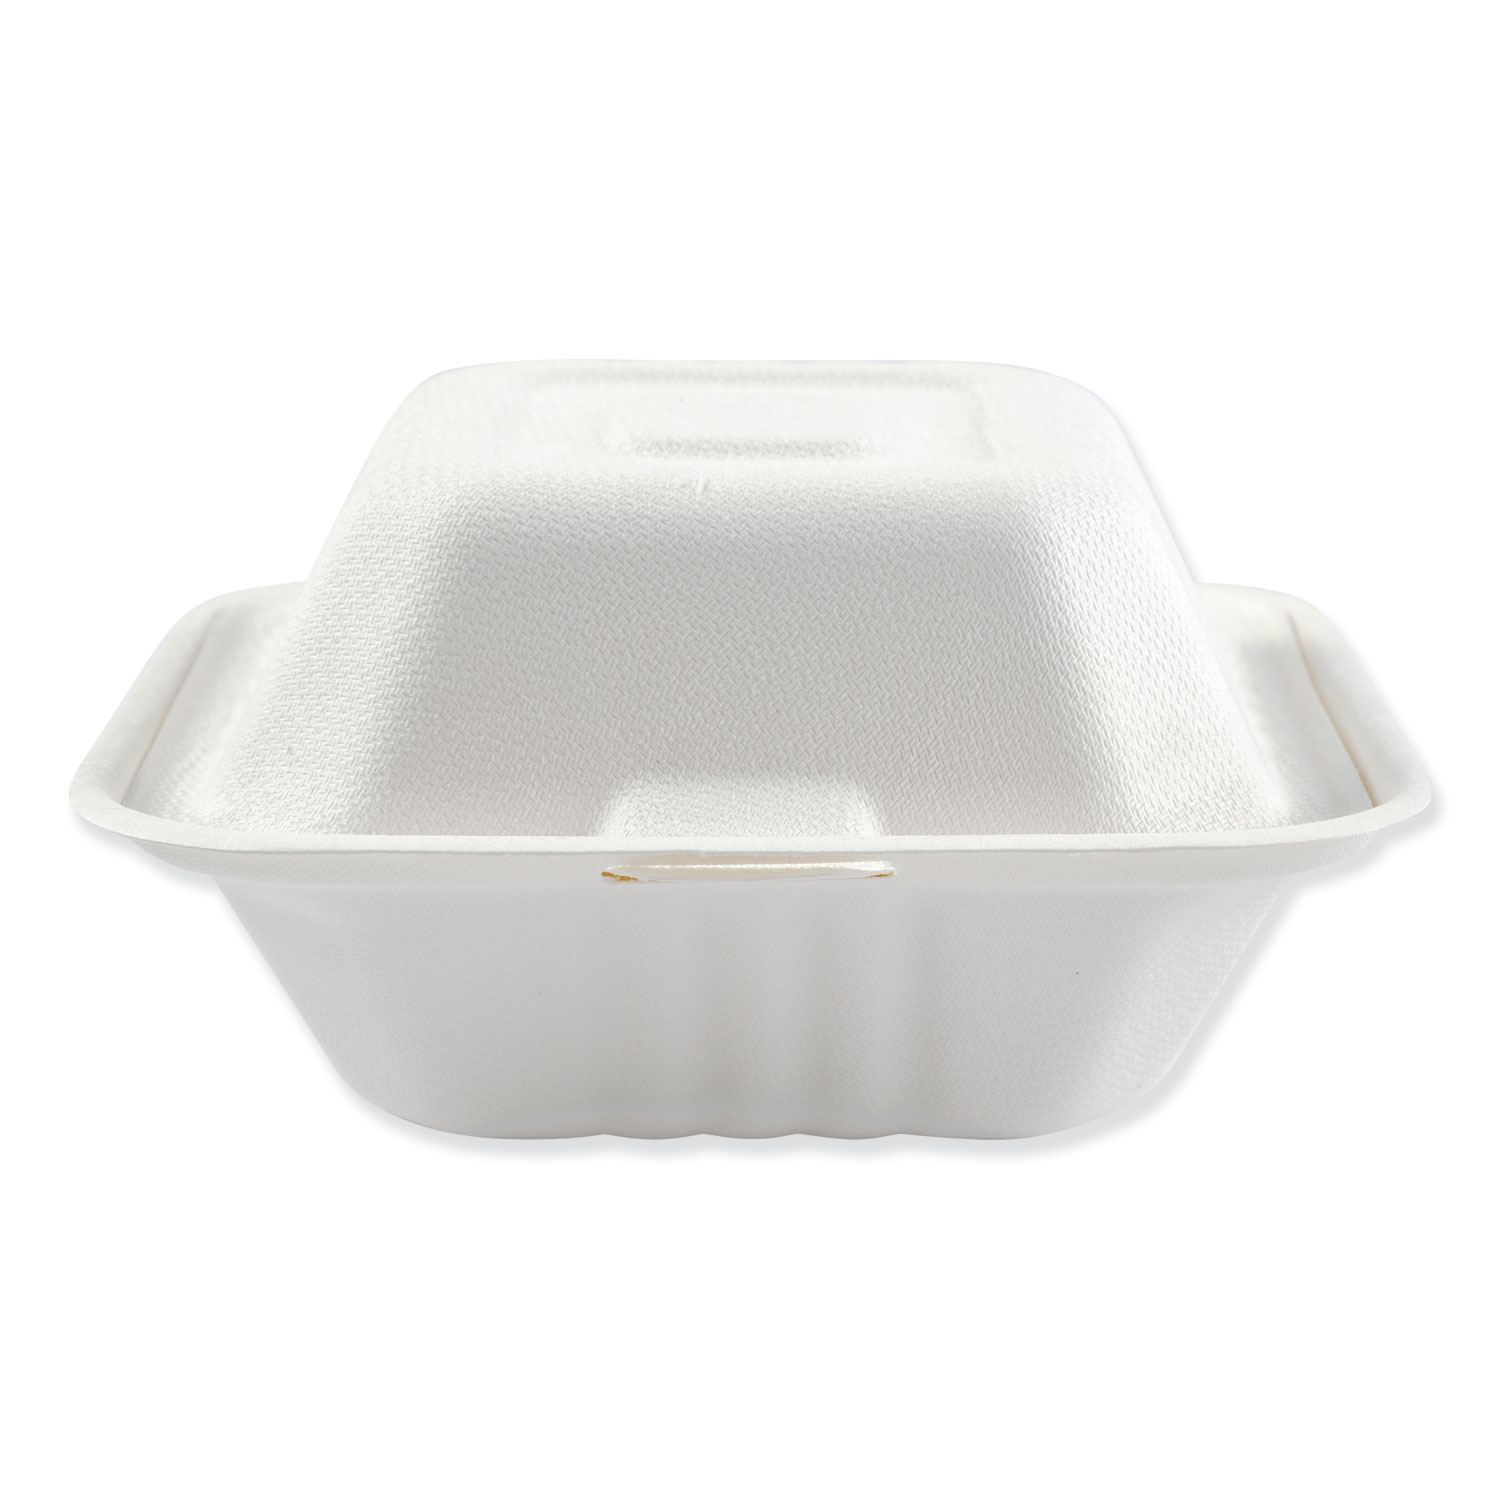  Boardwalk BWKHINGEWF1CM6 Bagasse Molded Fiber Food Containers, Hinged-Lid, 1-Compartment 6 x 6, White, 125/Sleeve, 4 Sleeves/Carton (BWKHINGEWF1CM6) 